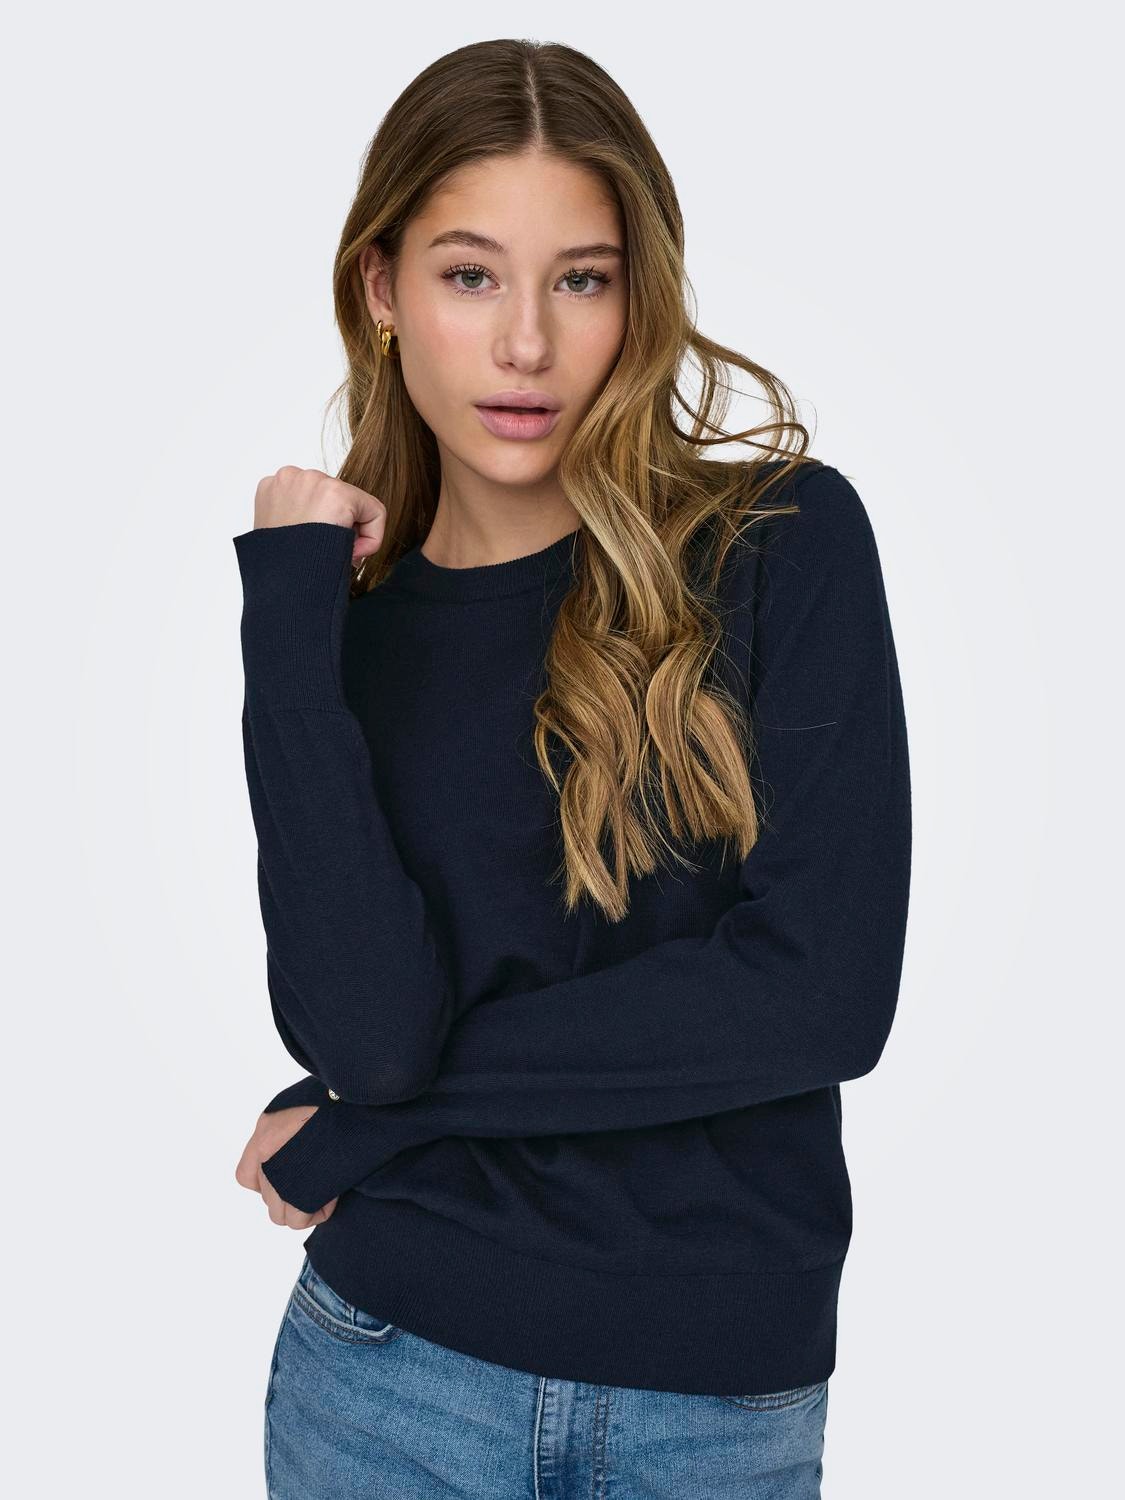 ONLY Knit fit O-hals Manchetten met knoop Pullover -Sky Captain - 15312026